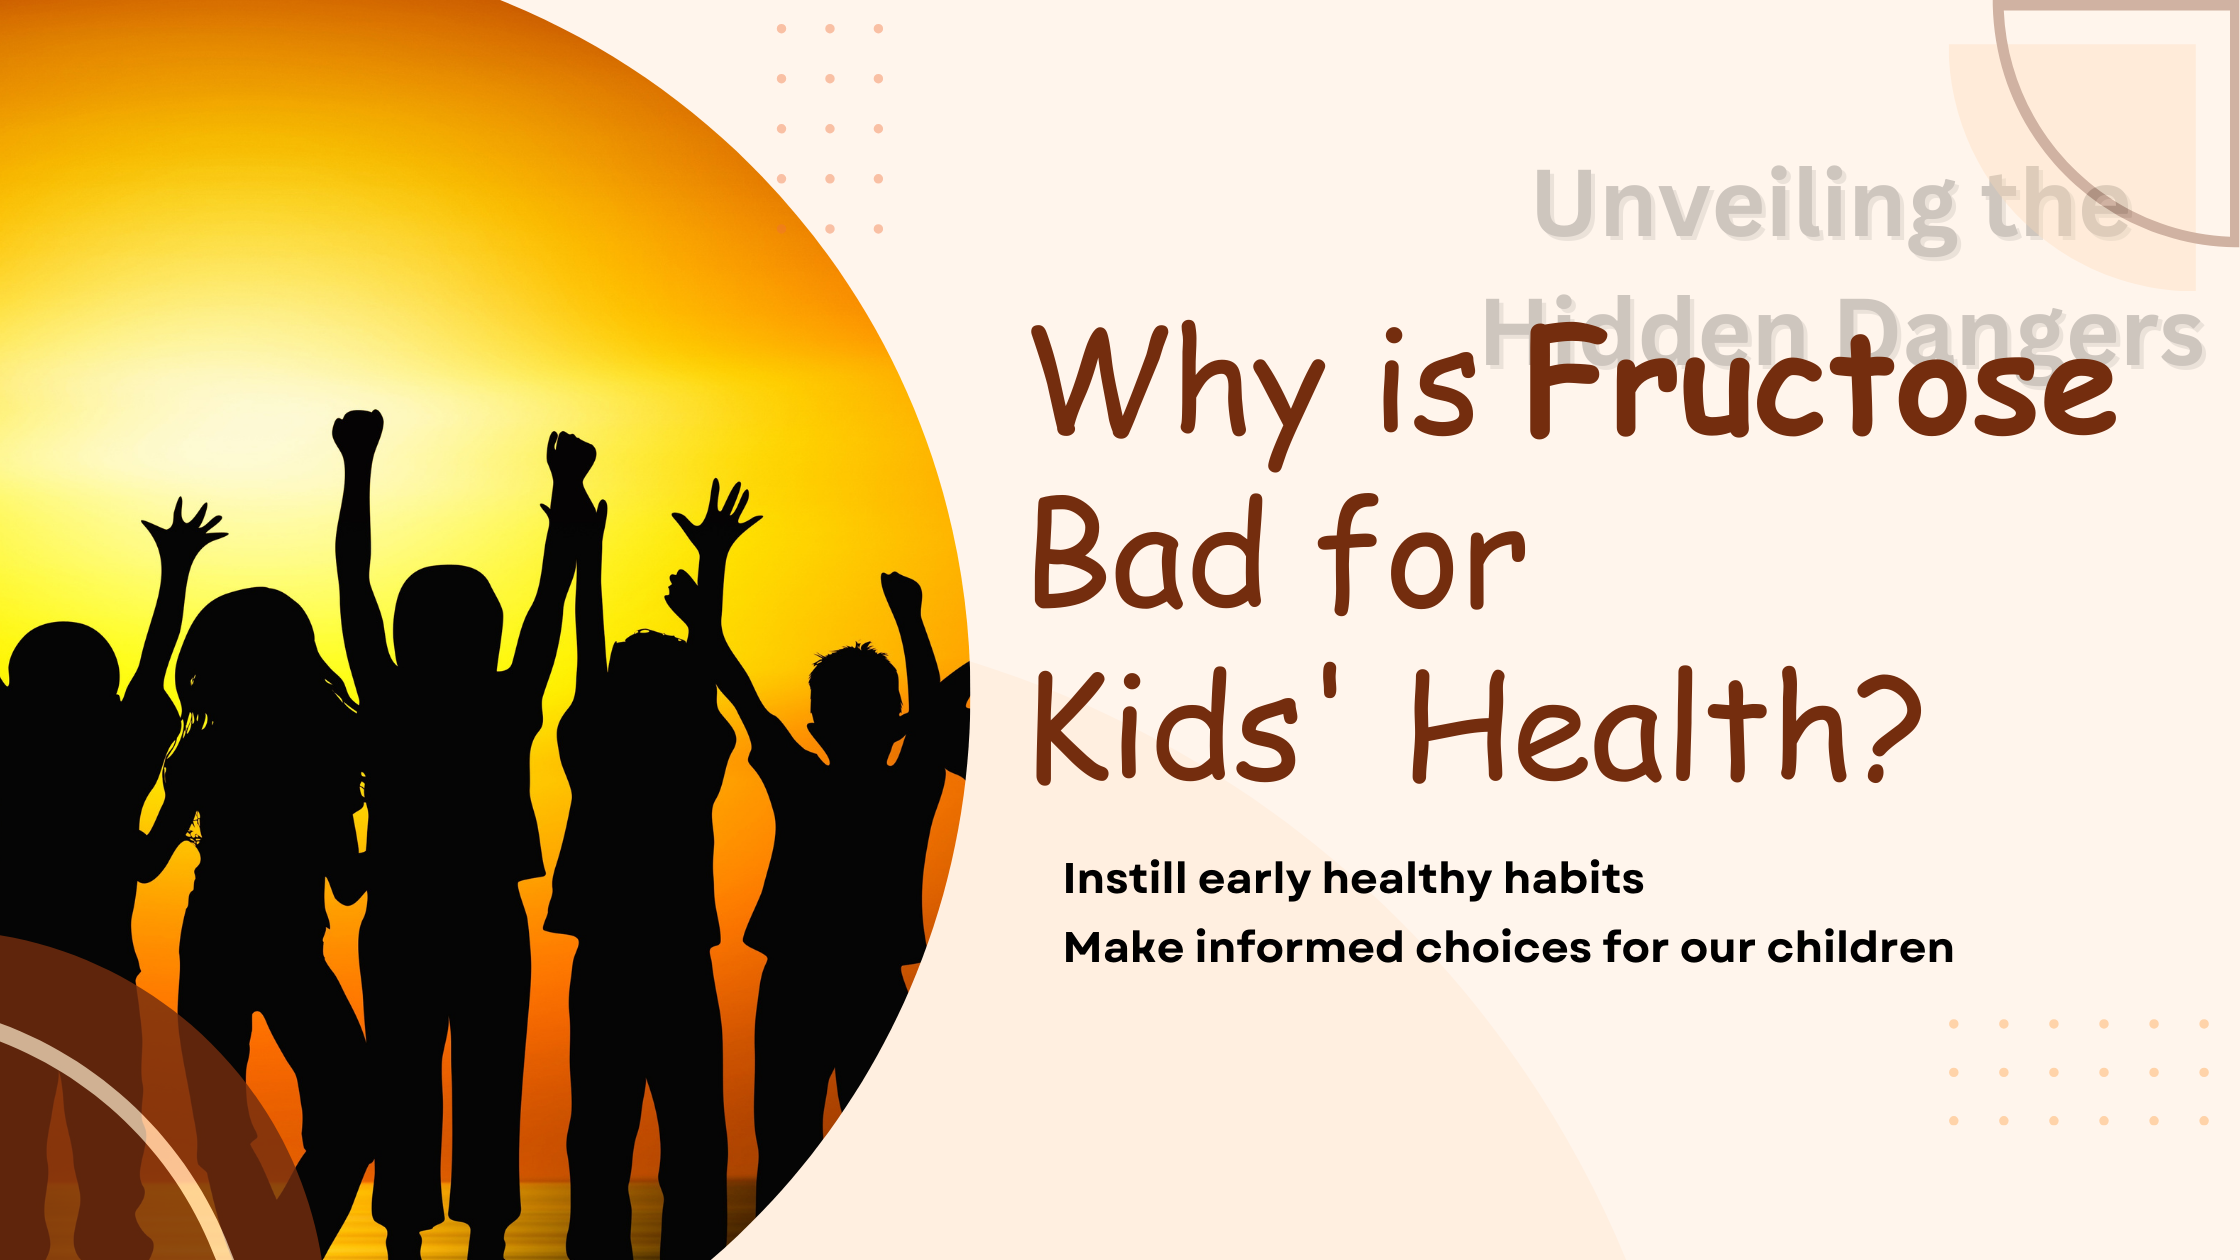 blog - Why is Fructose Bad for Kids' Health?